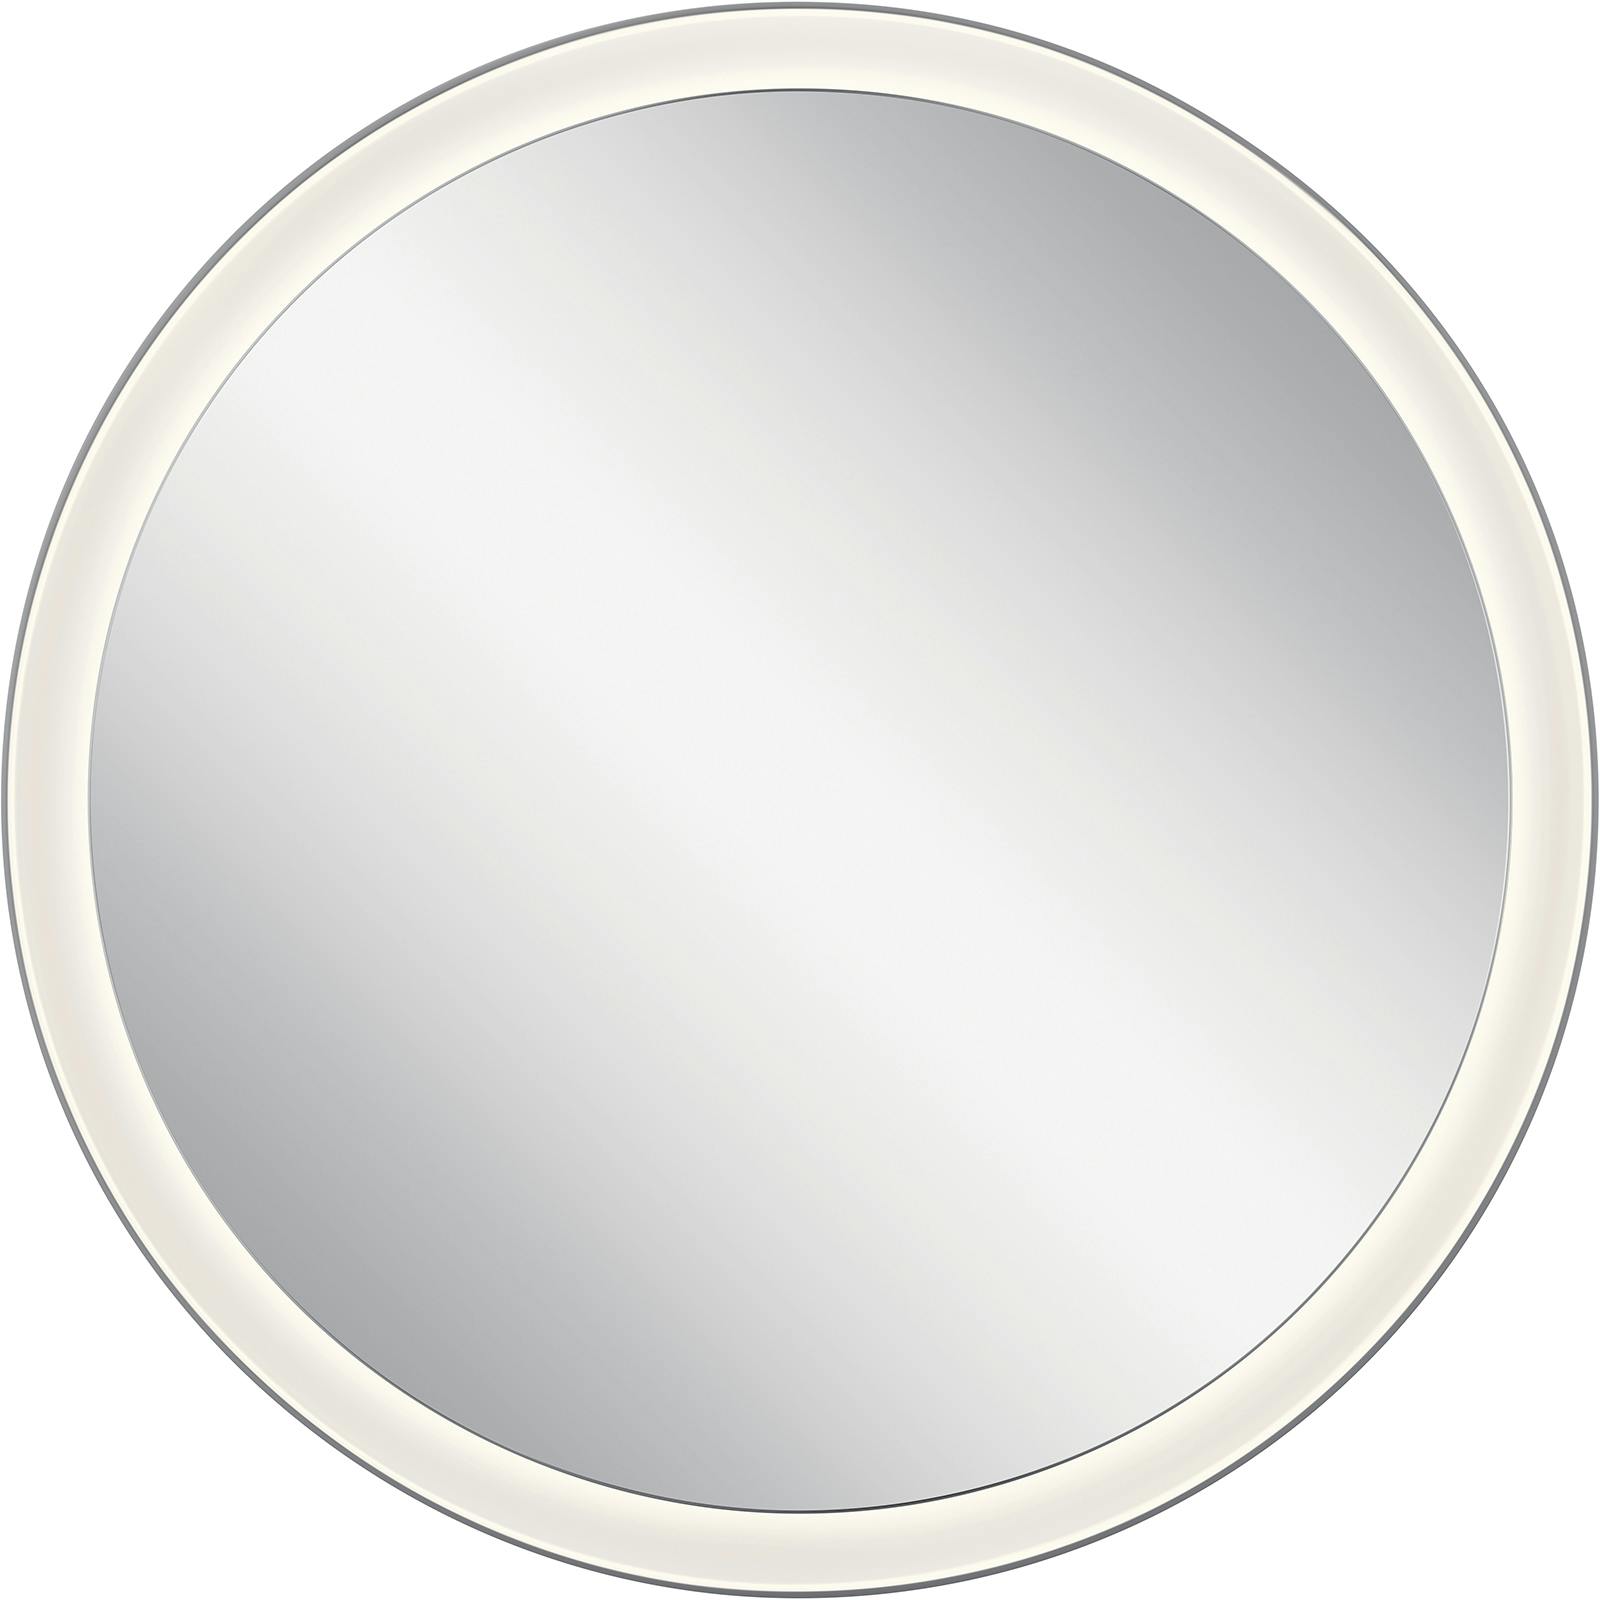 Front view of the Ryame™ Round Lighted Mirror Silver on a white background